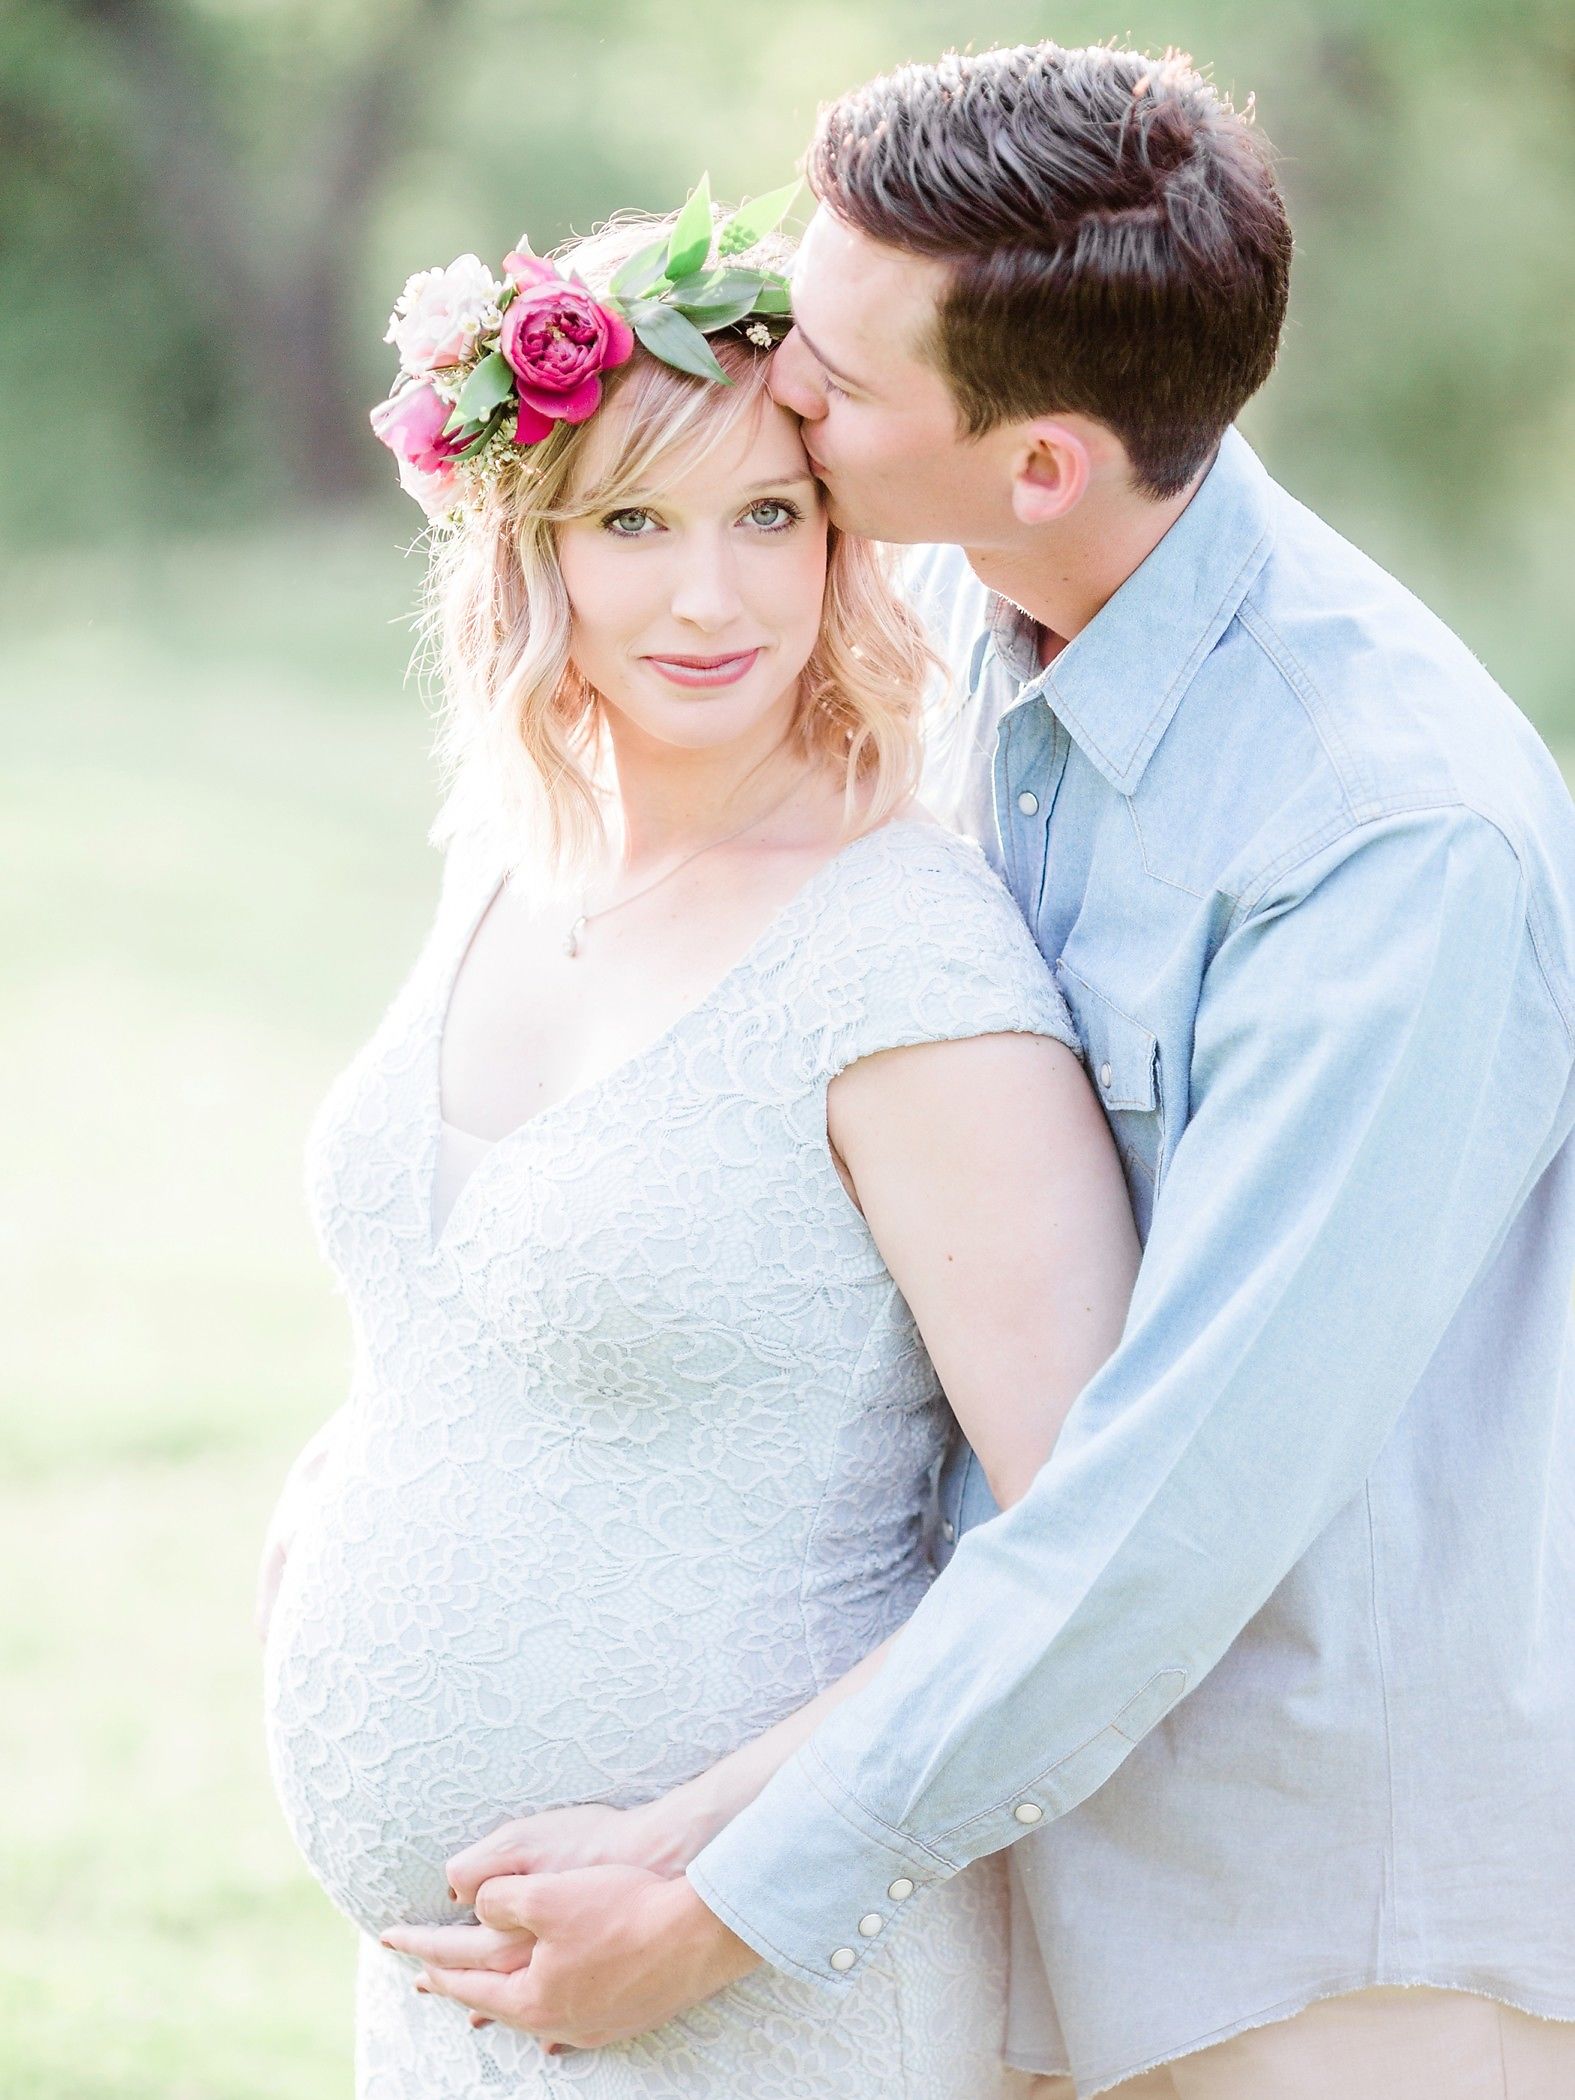 Flower crown maternity photo